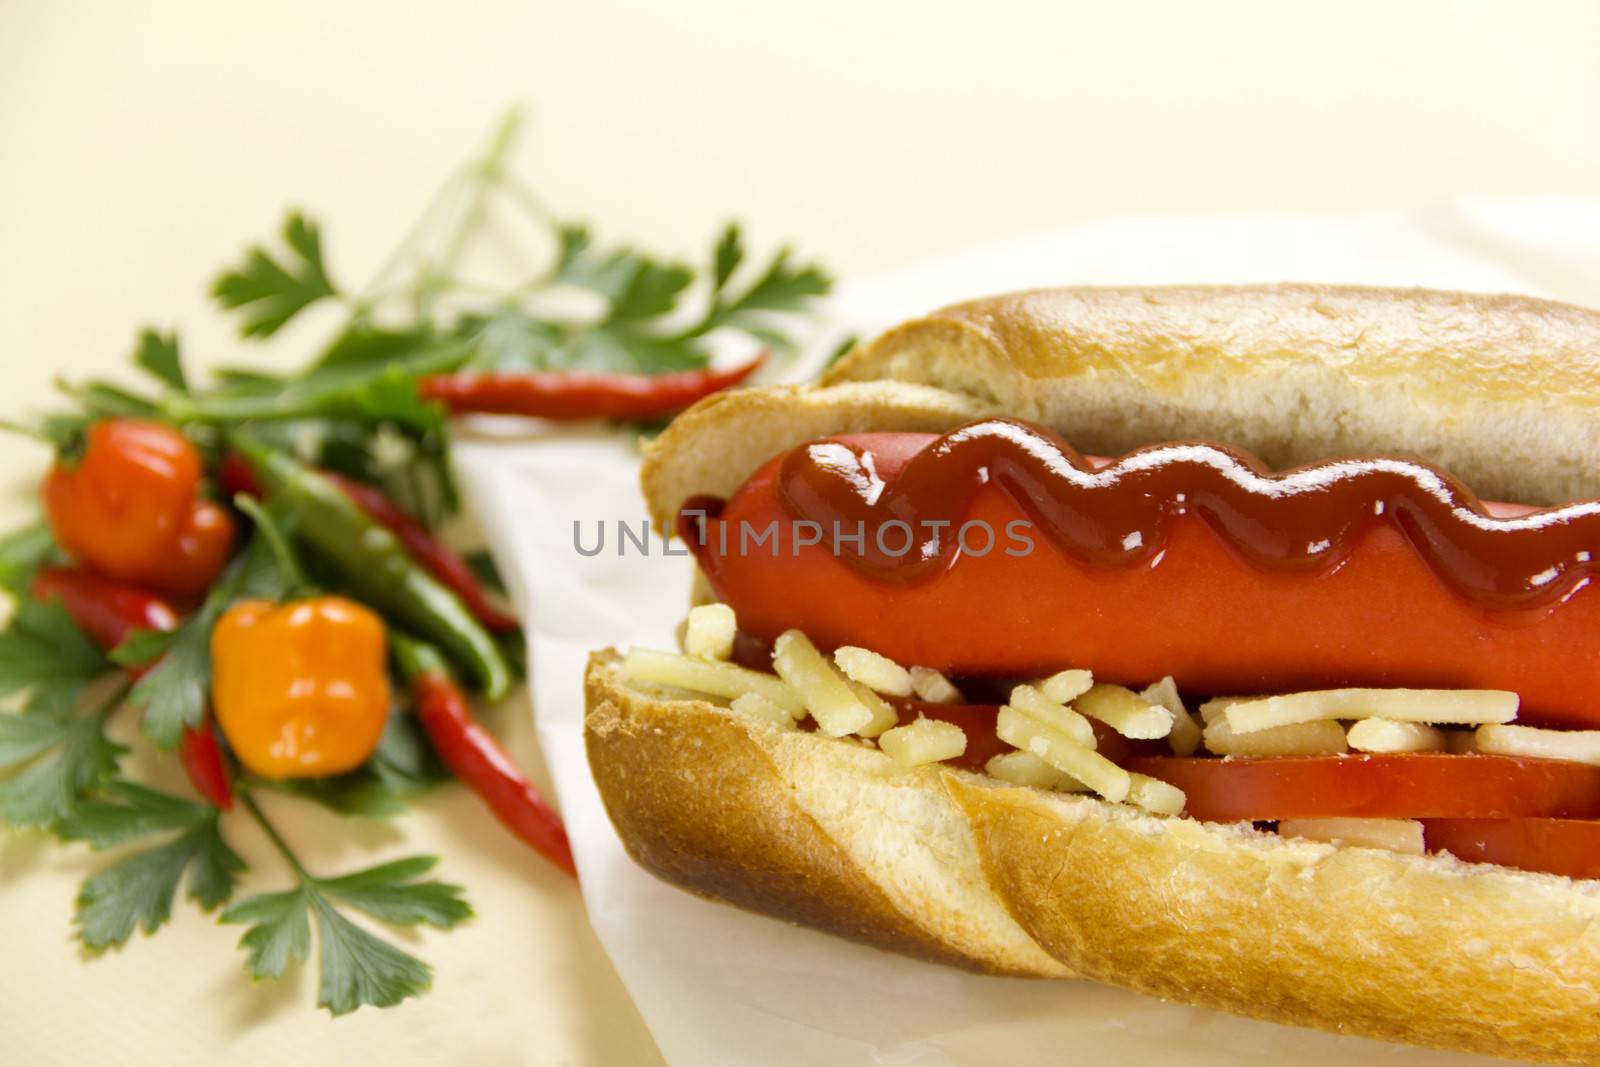 Freshly prepared hot dog with ketchup tomato cheese and fresh chillies.